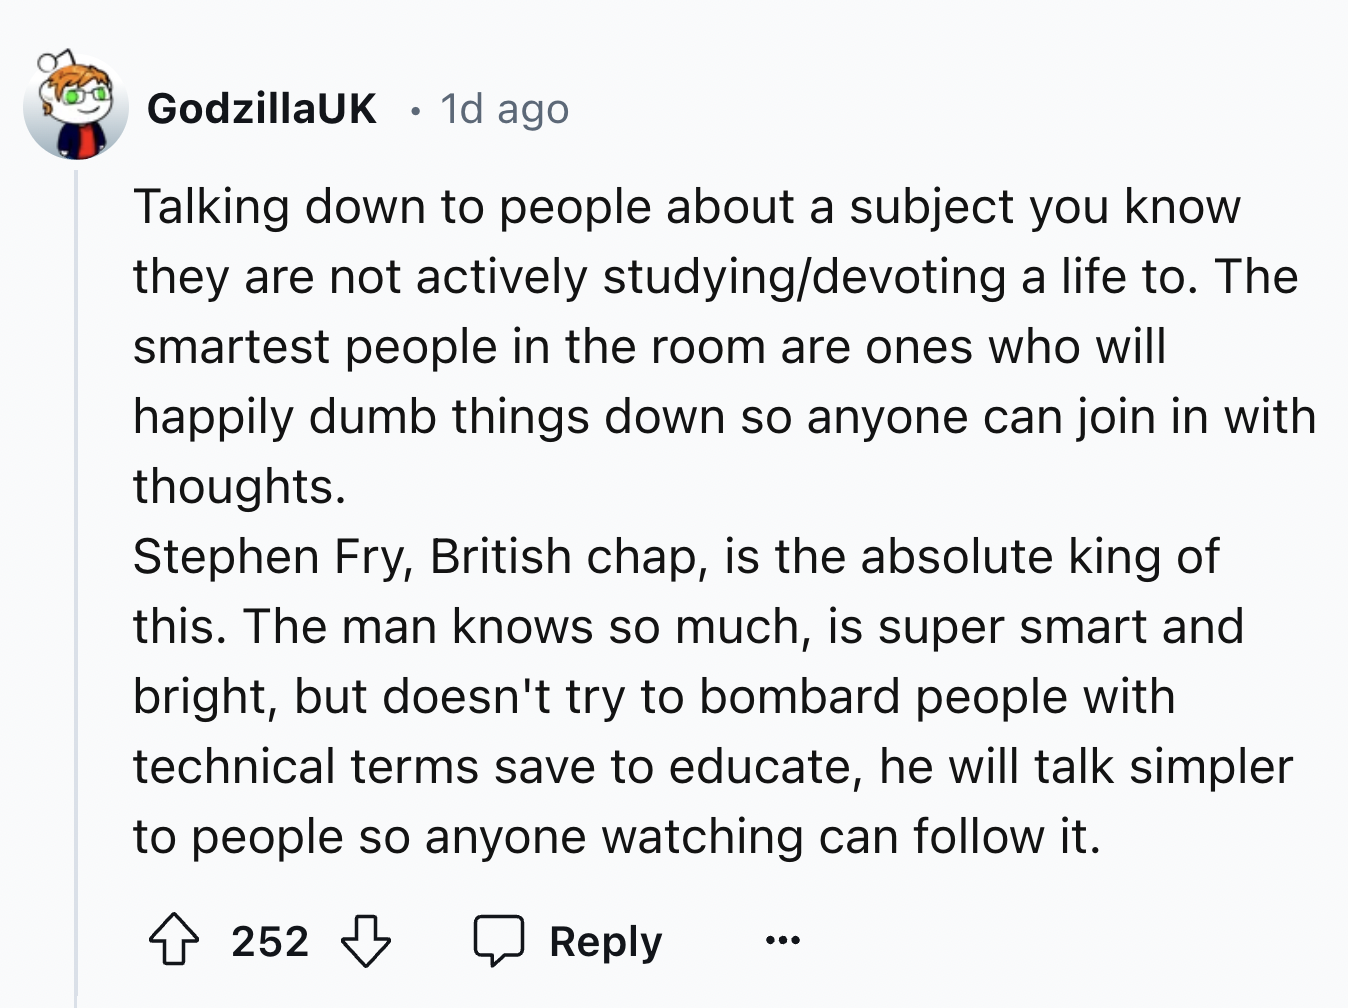 screenshot - GodzillaUK 1d ago . Talking down to people about a subject you know they are not actively studyingdevoting a life to. The smartest people in the room are ones who will happily dumb things down so anyone can join in with thoughts. Stephen Fry,